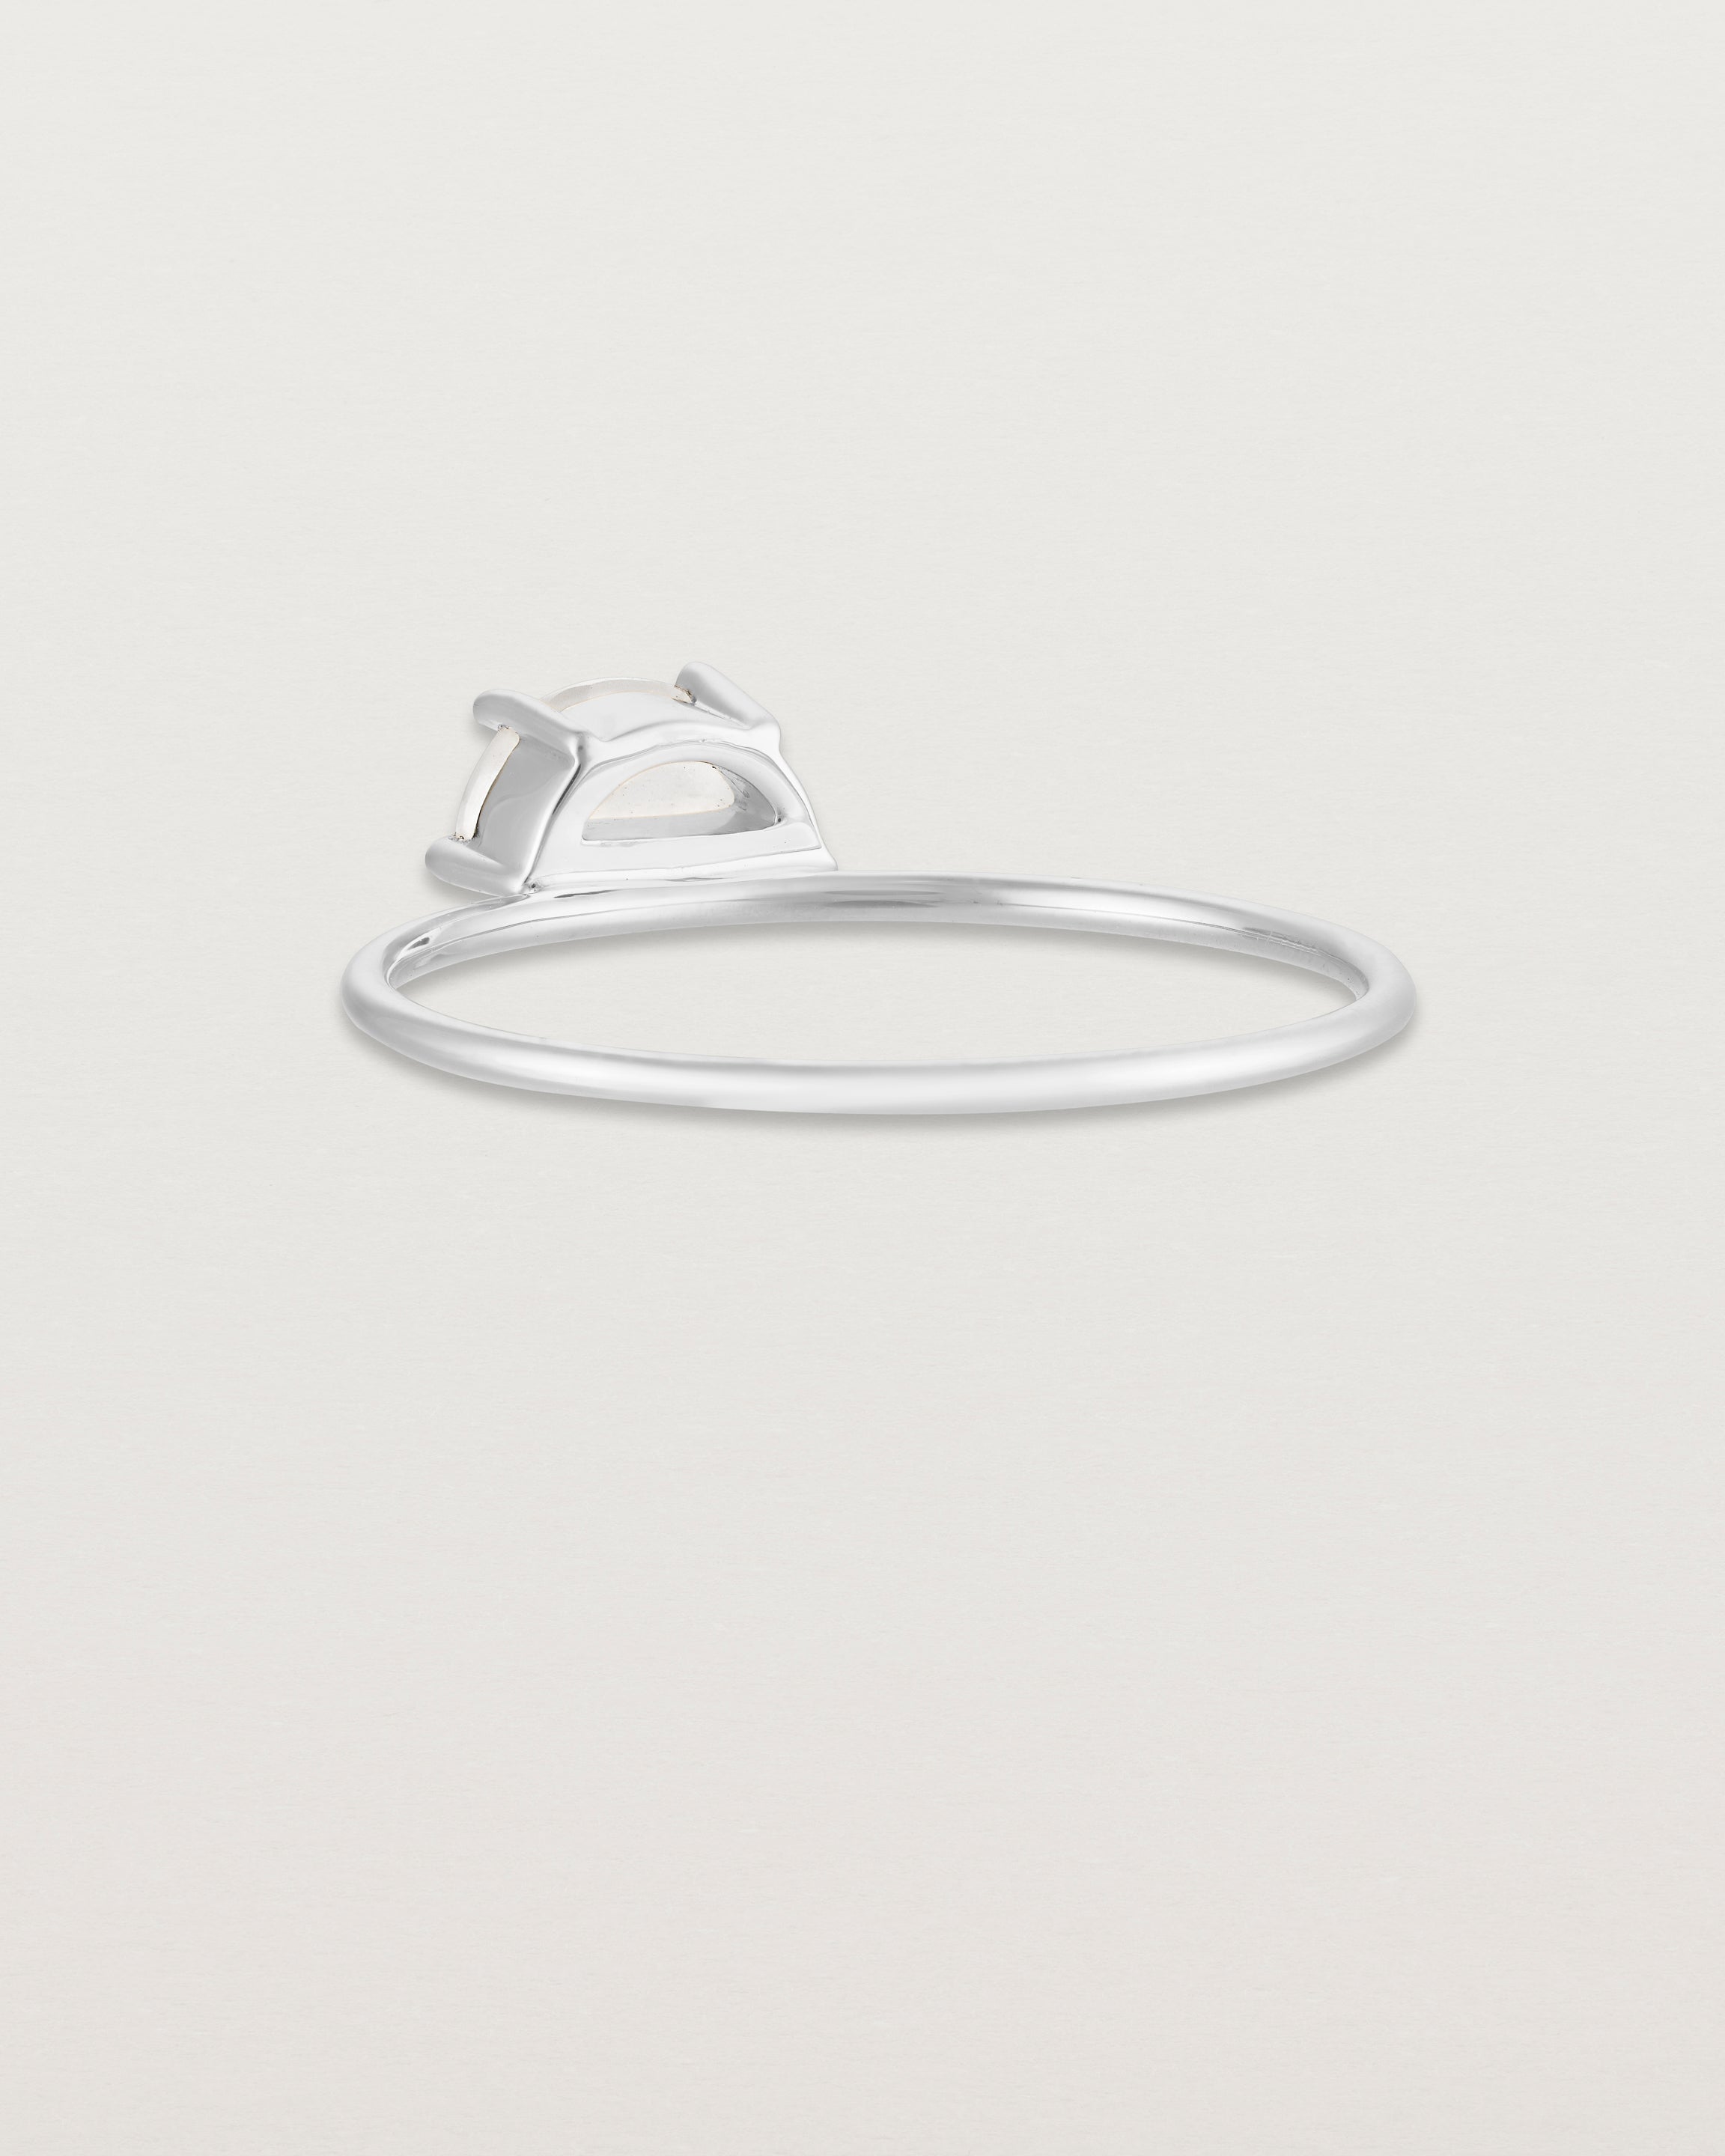 Back view of the Tiny Half Moon Ring | Moonstone in sterling silver.